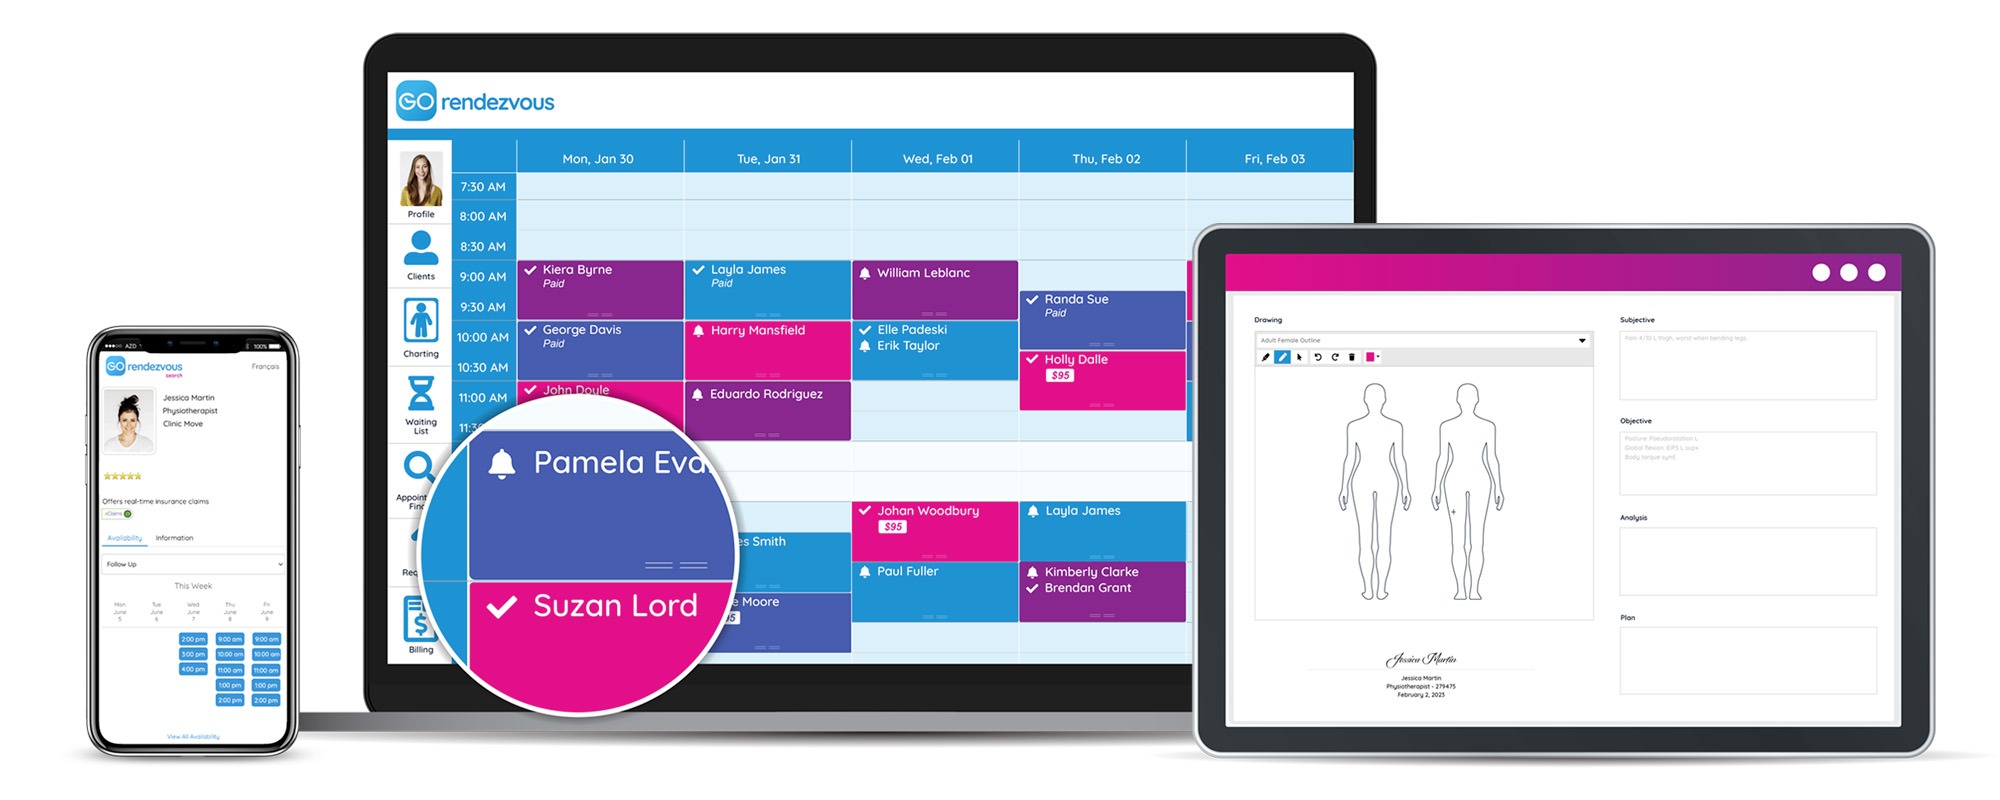 A view of a kinesiologist's GOrendezvous schedule on different devices